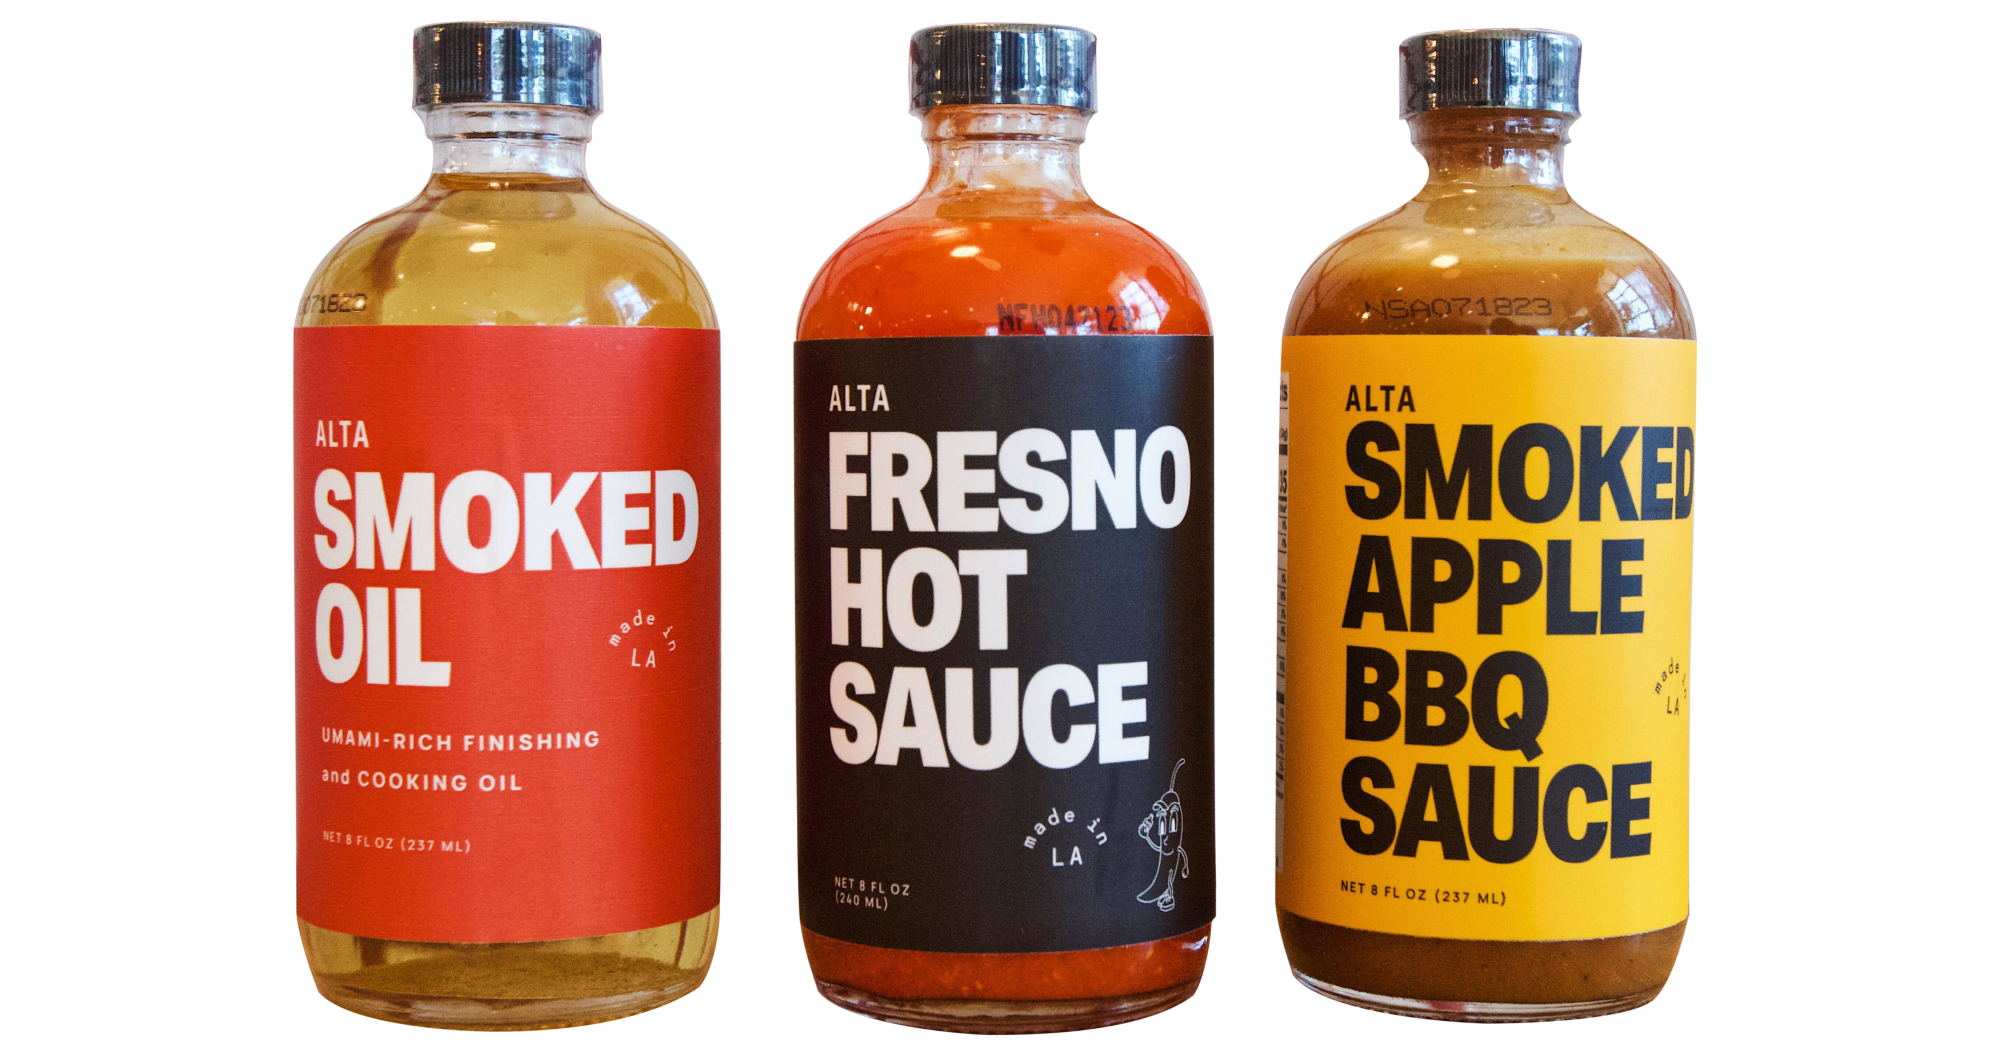 Three bottles of Alta pantry sauces: smoked oil, Fresno hot sauce and smoked apple BBQ